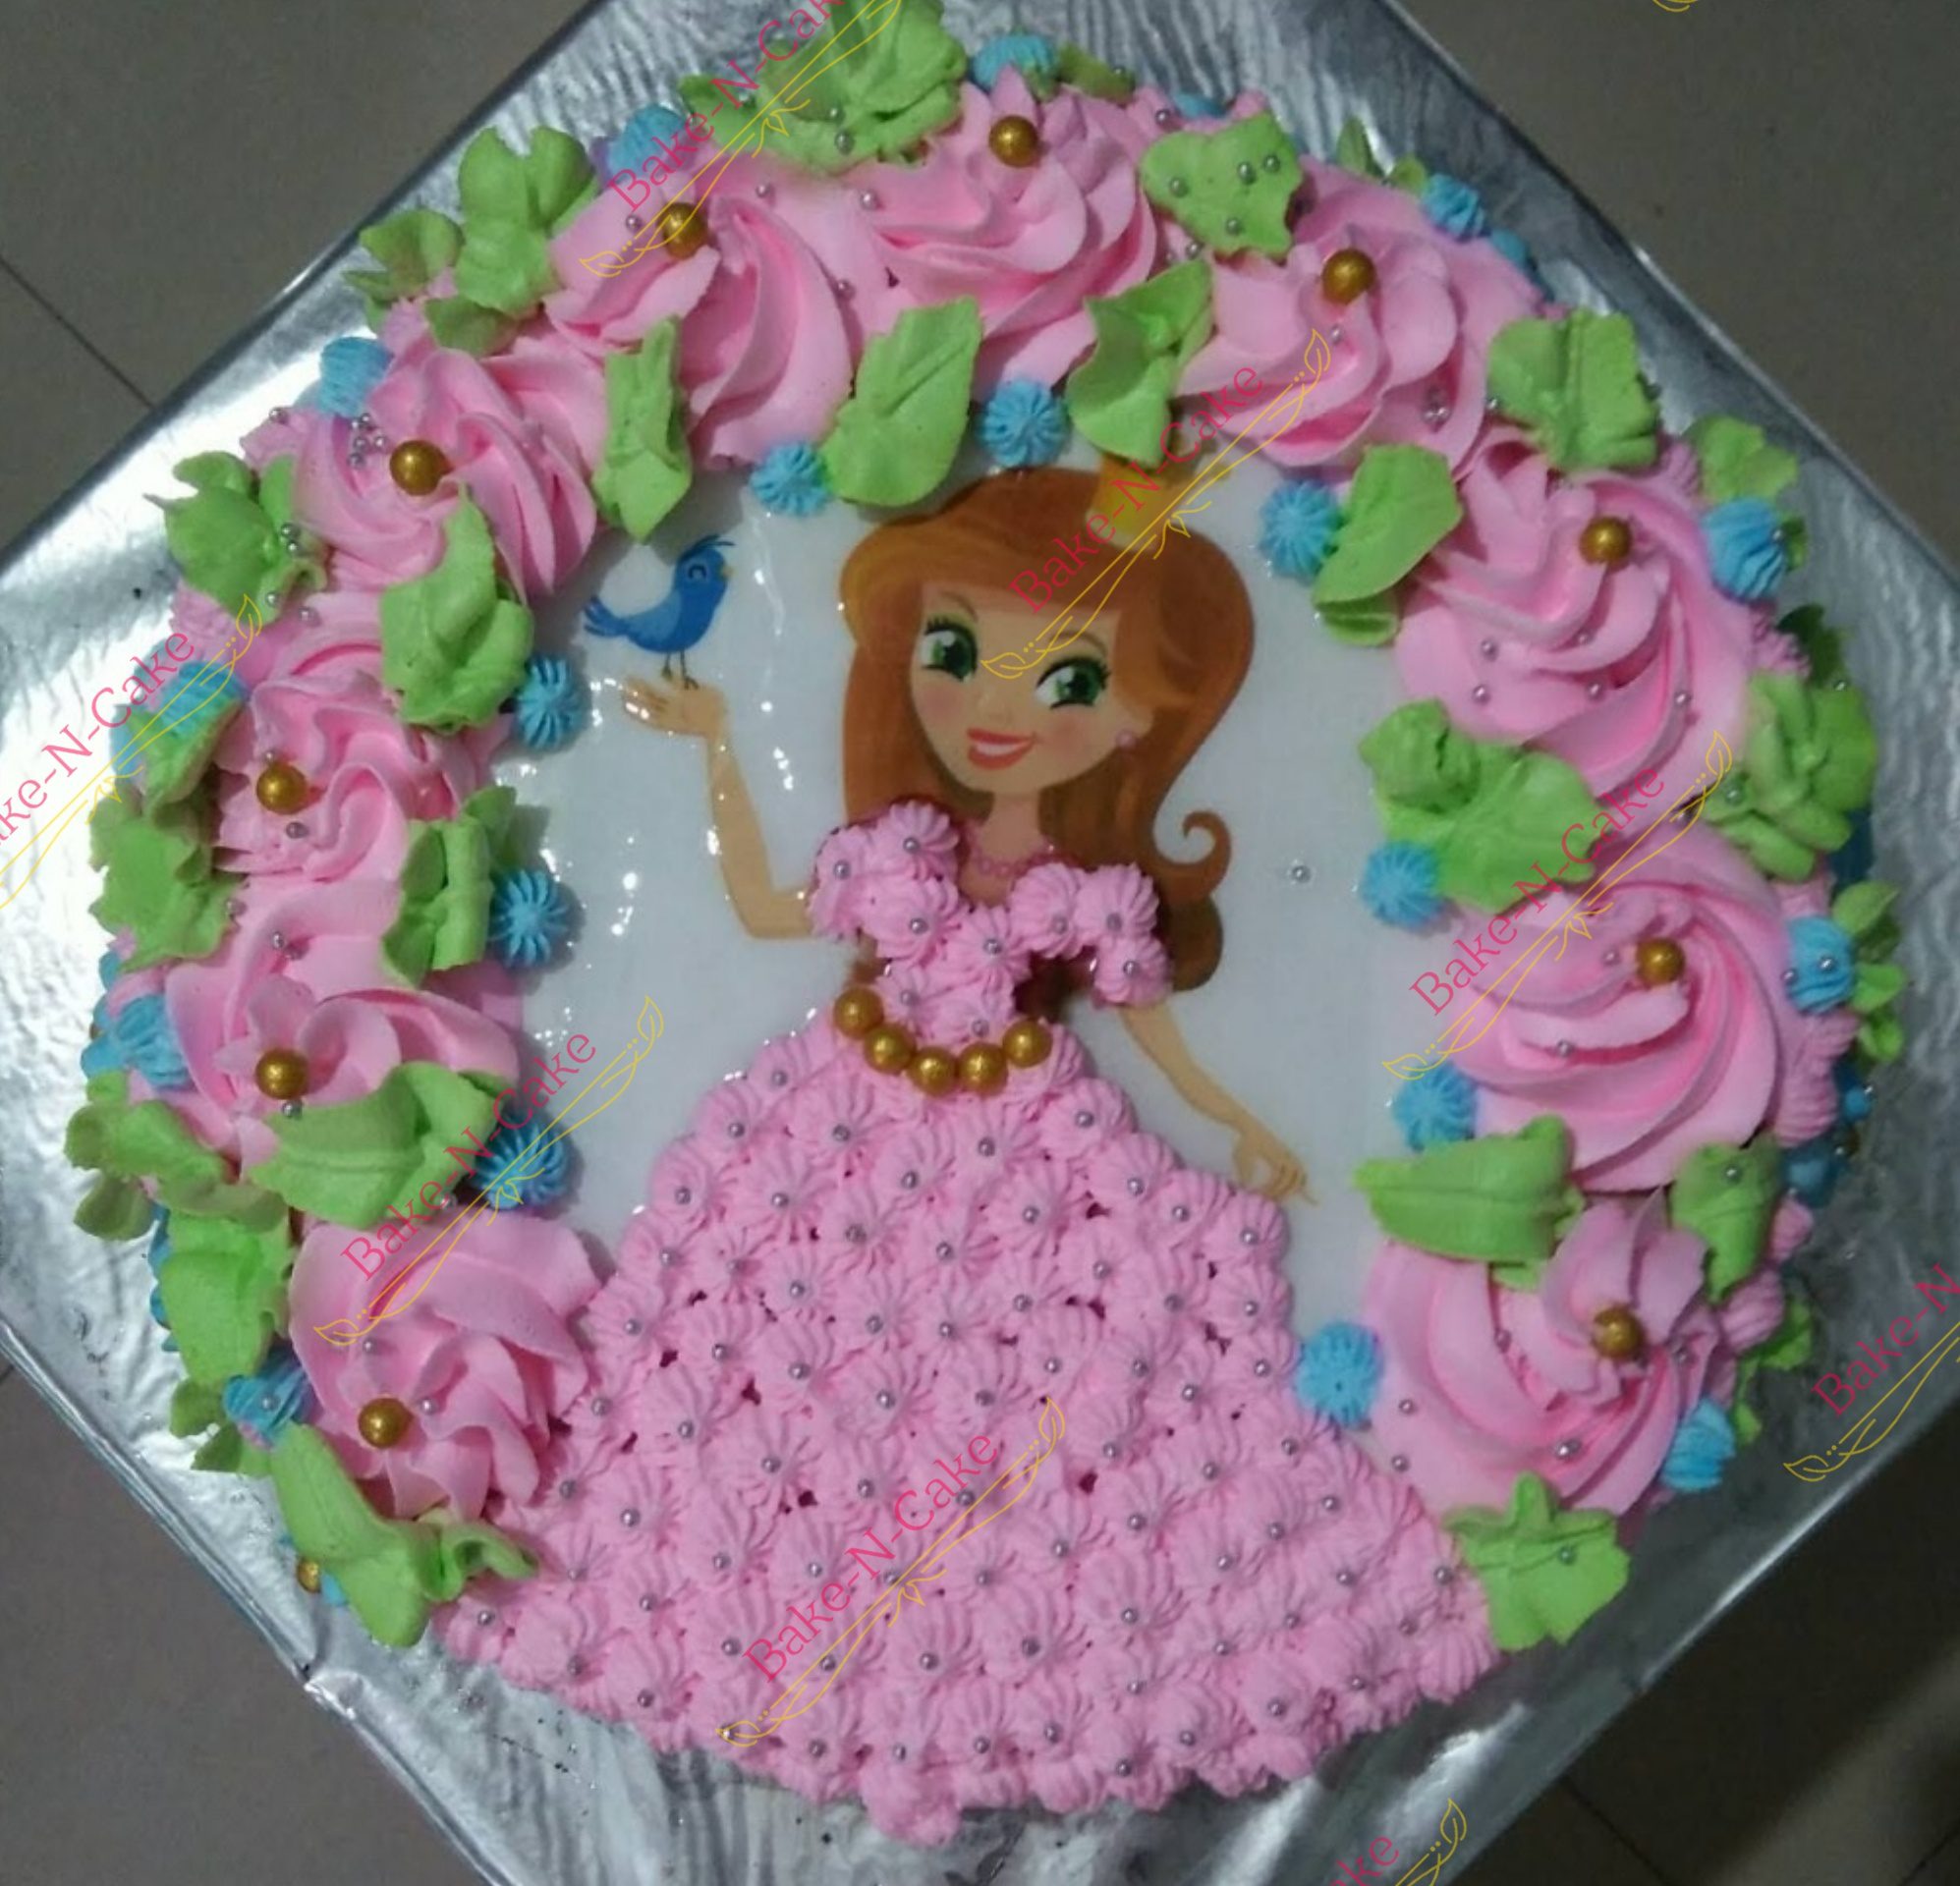 Barbie Doll 3D photo cake Designs, Images, Price Near Me